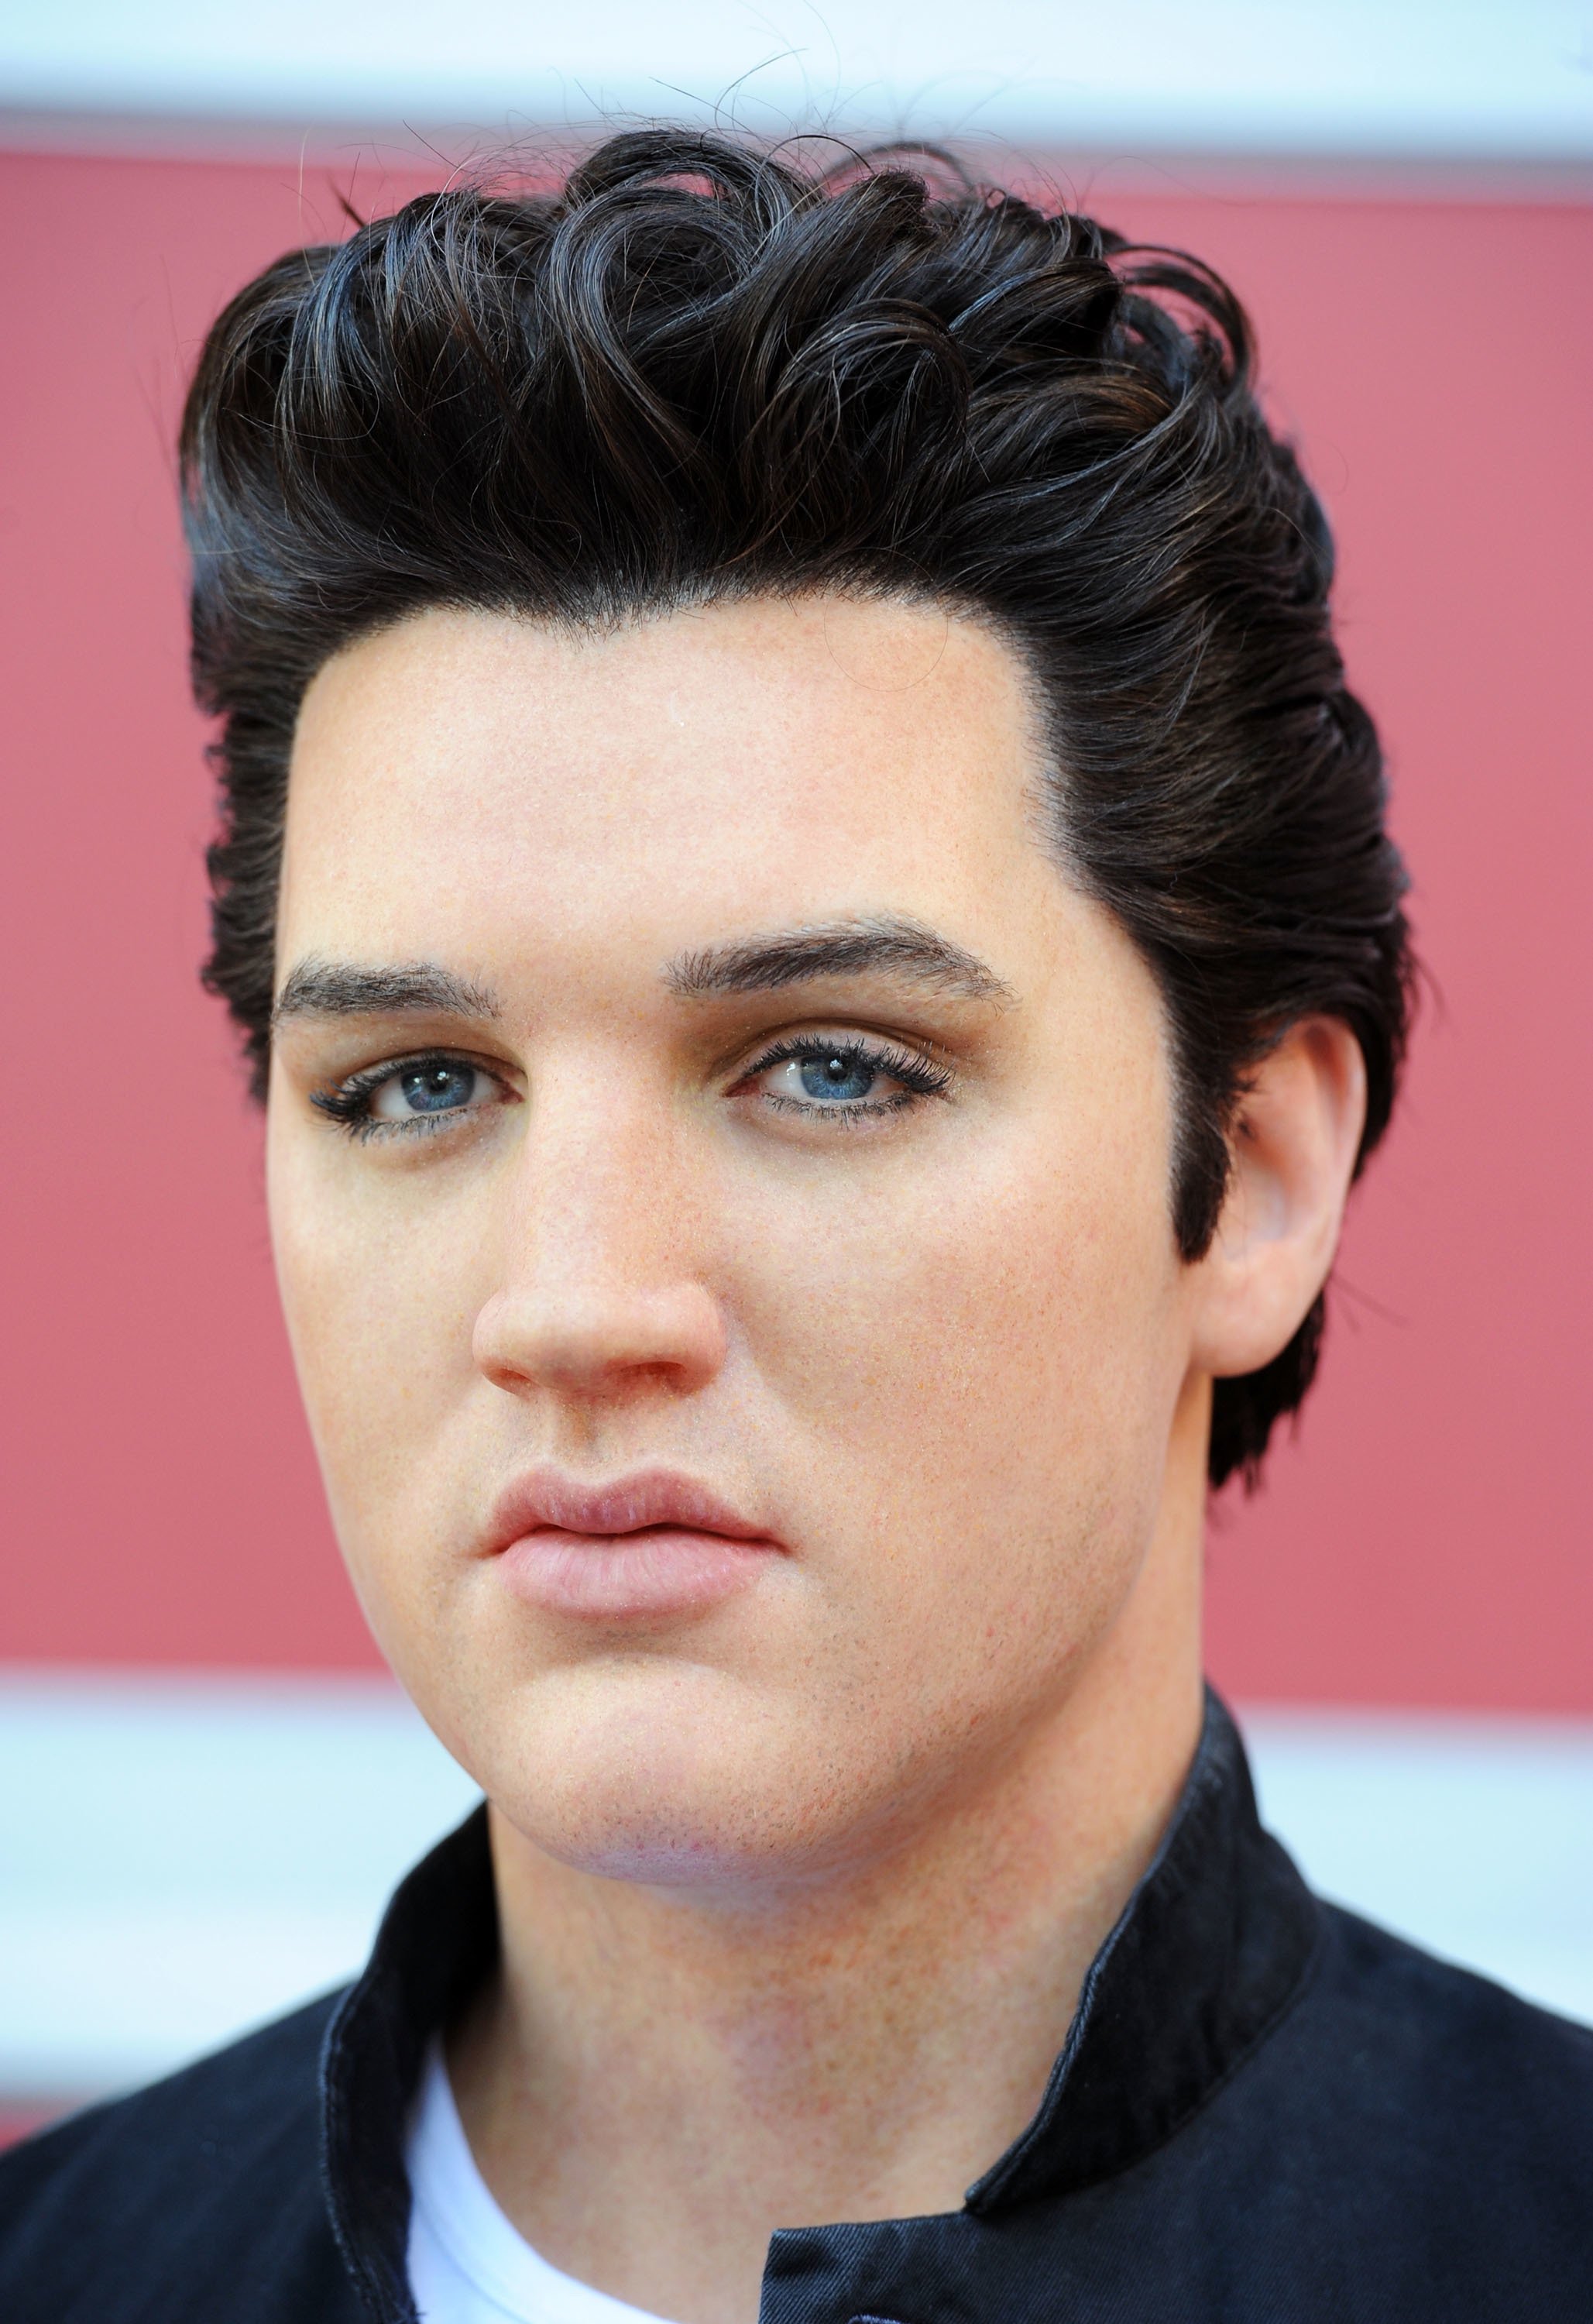 Madame Tussauds Hollywood unveils its first-ever Elvis Presley wax figure. | Source: Getty Images